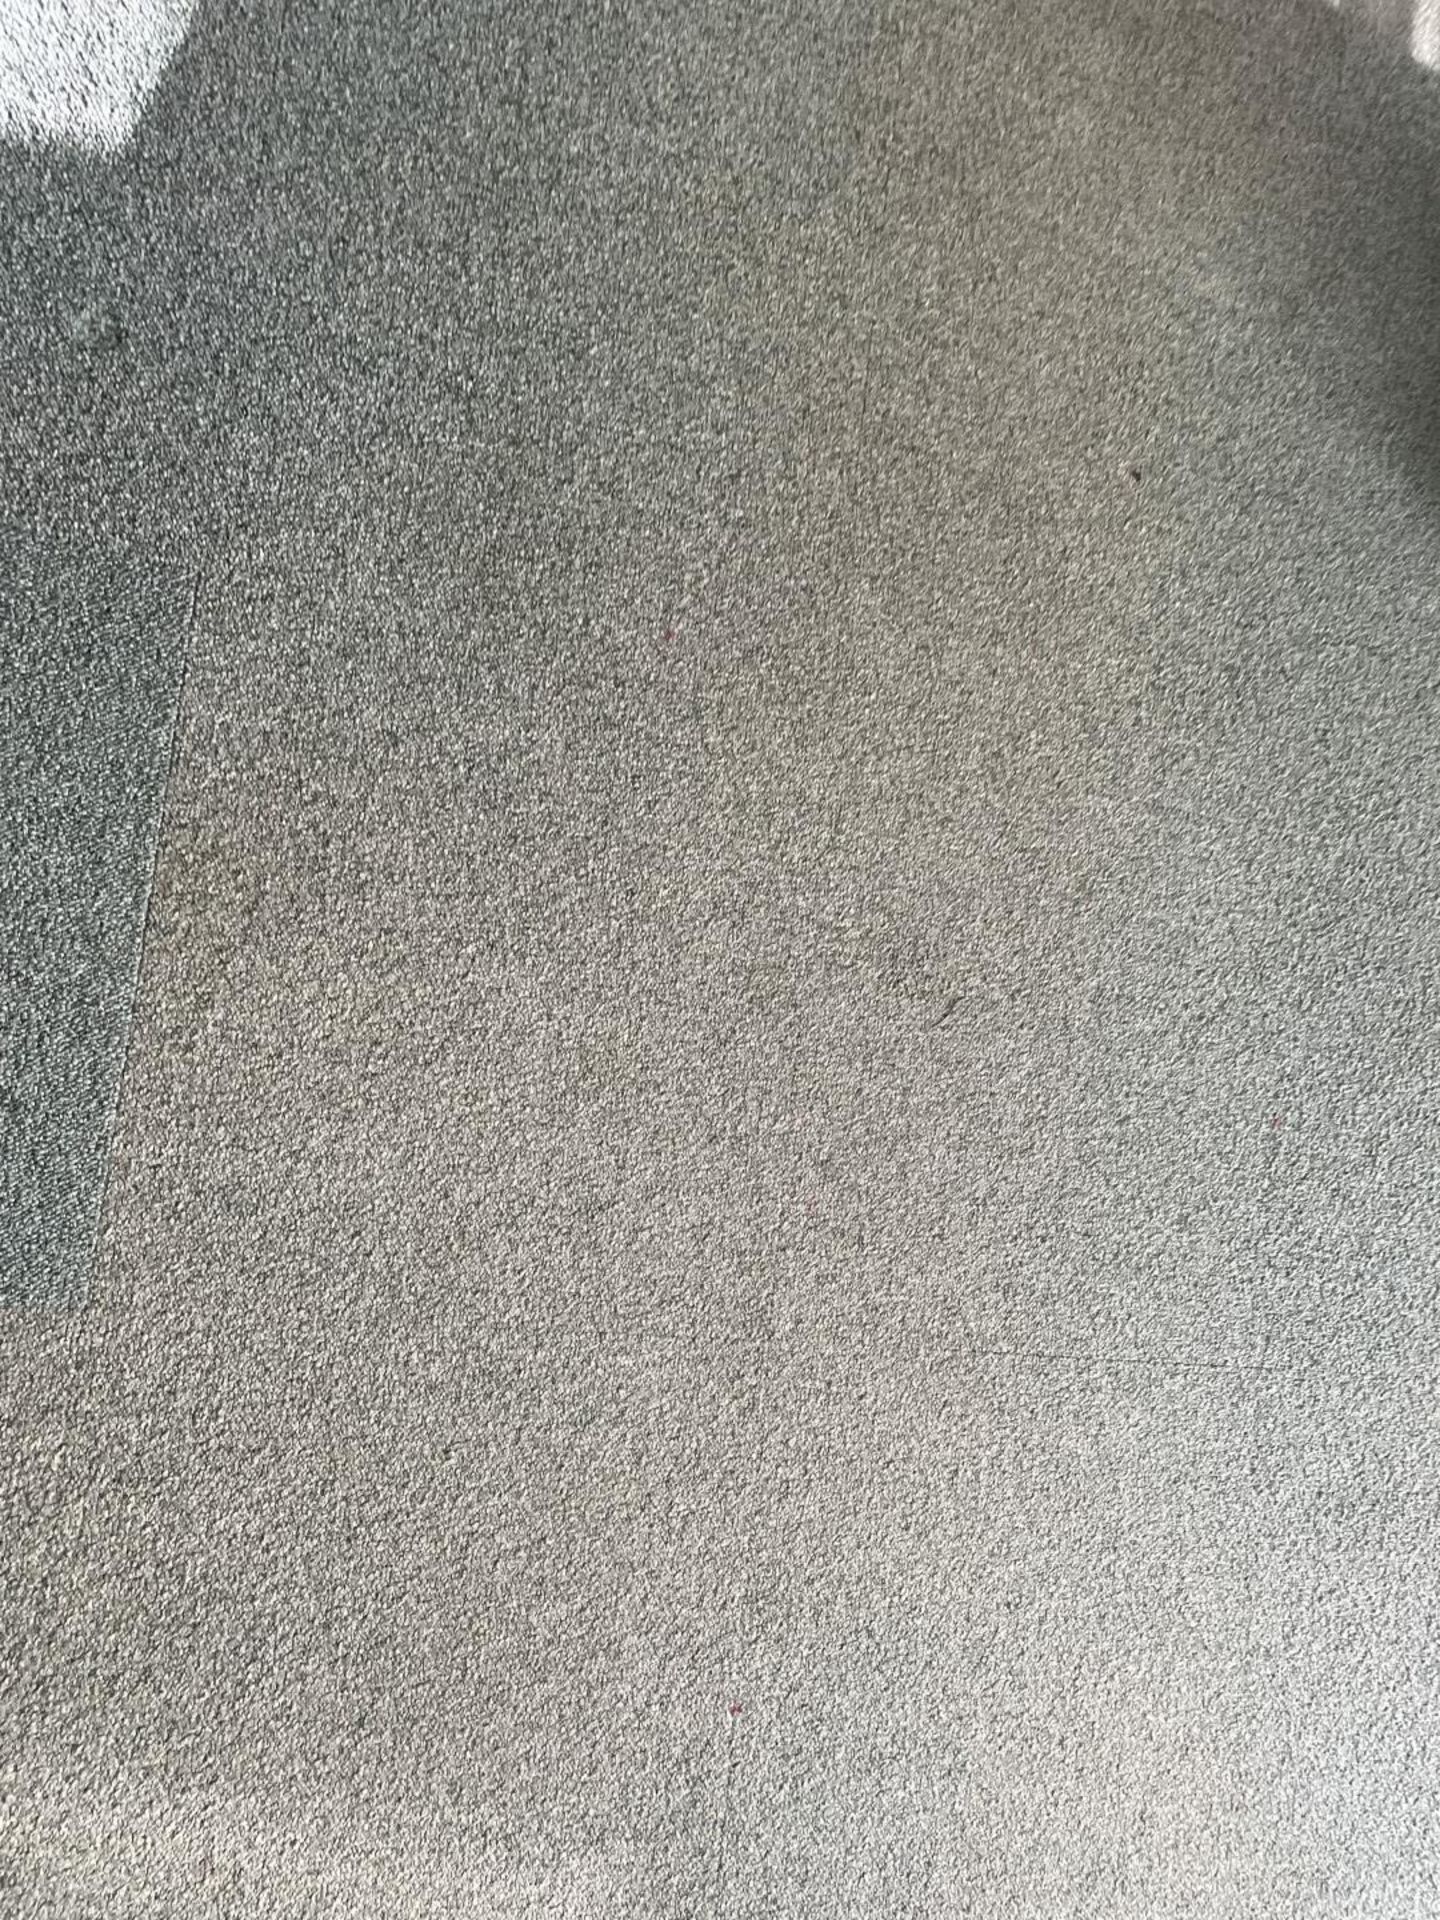 Approx 80 x Floor Carpet Tiles - Ref: ED159J - To Be Removed From An Executive Office Environment -